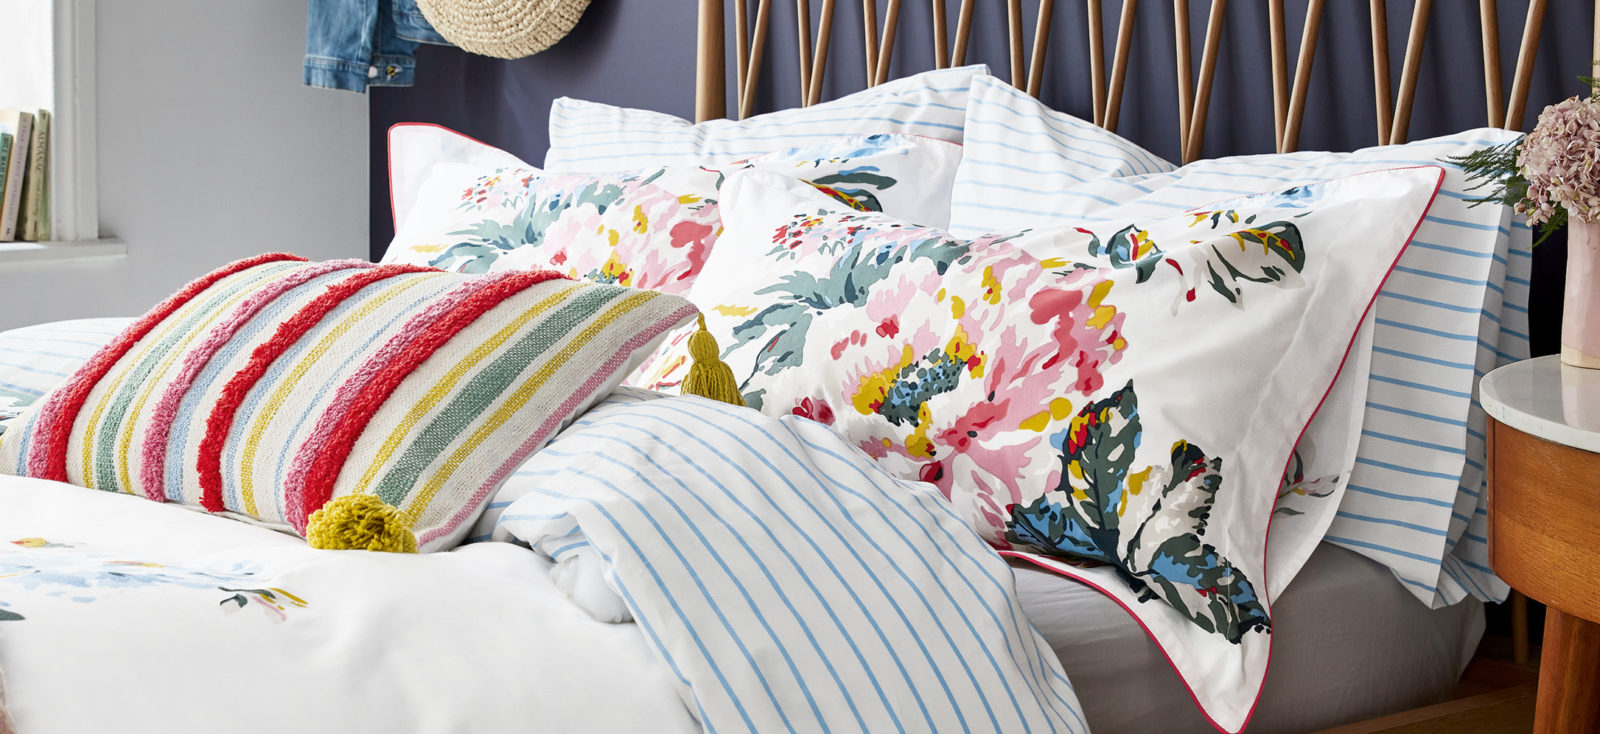 Bed with Joules bedding on it.